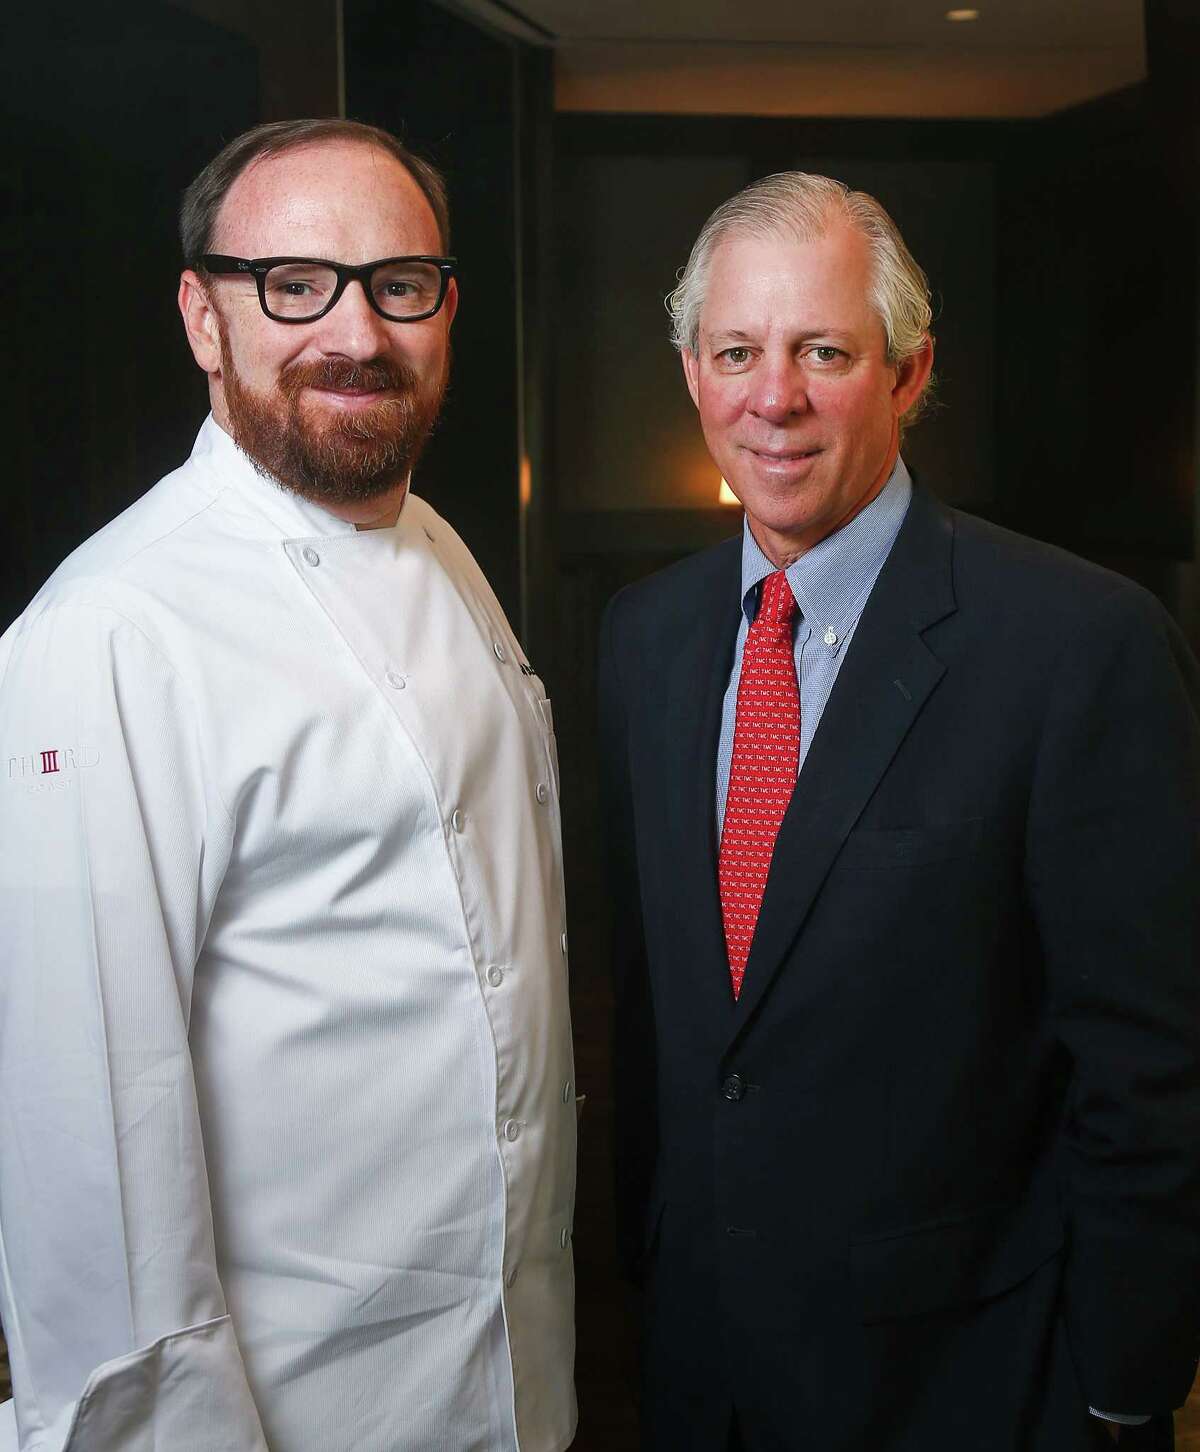 Chef Jon Buchanan, left, and Dr. Robert Robbins, president and CEO of the Texas Medical Center, pose for a portrait at Trevisio, Wednesday, Sept. 28, 2016, in Houston. ( Jon Shapley / Houston Chronicle )